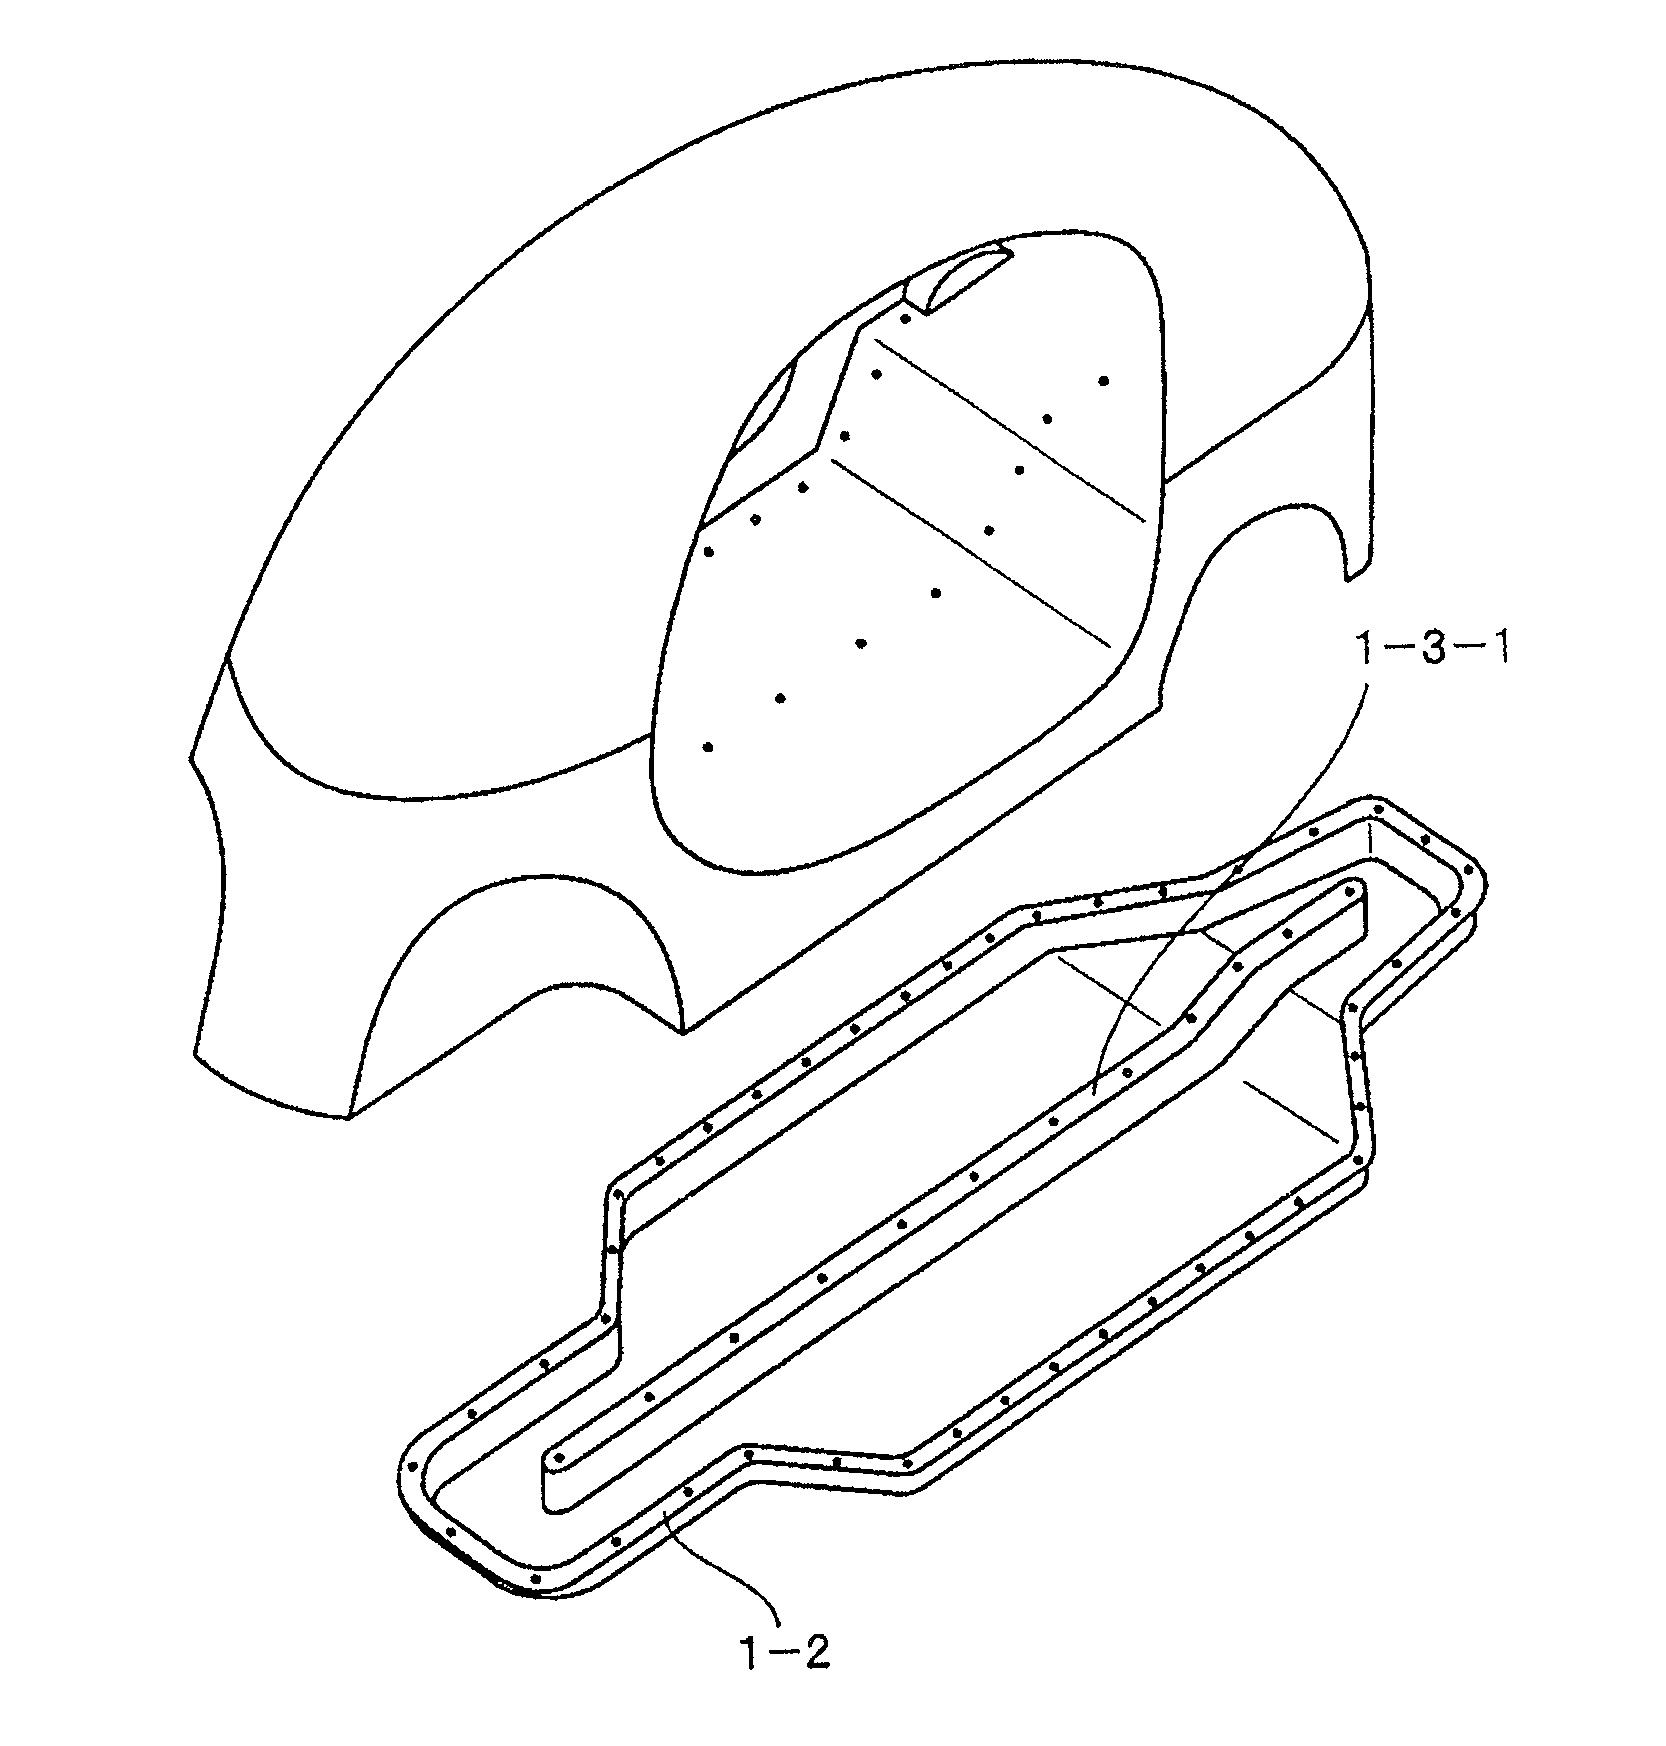 Vehicle of monocoque construction formed from thermoplastic resin members